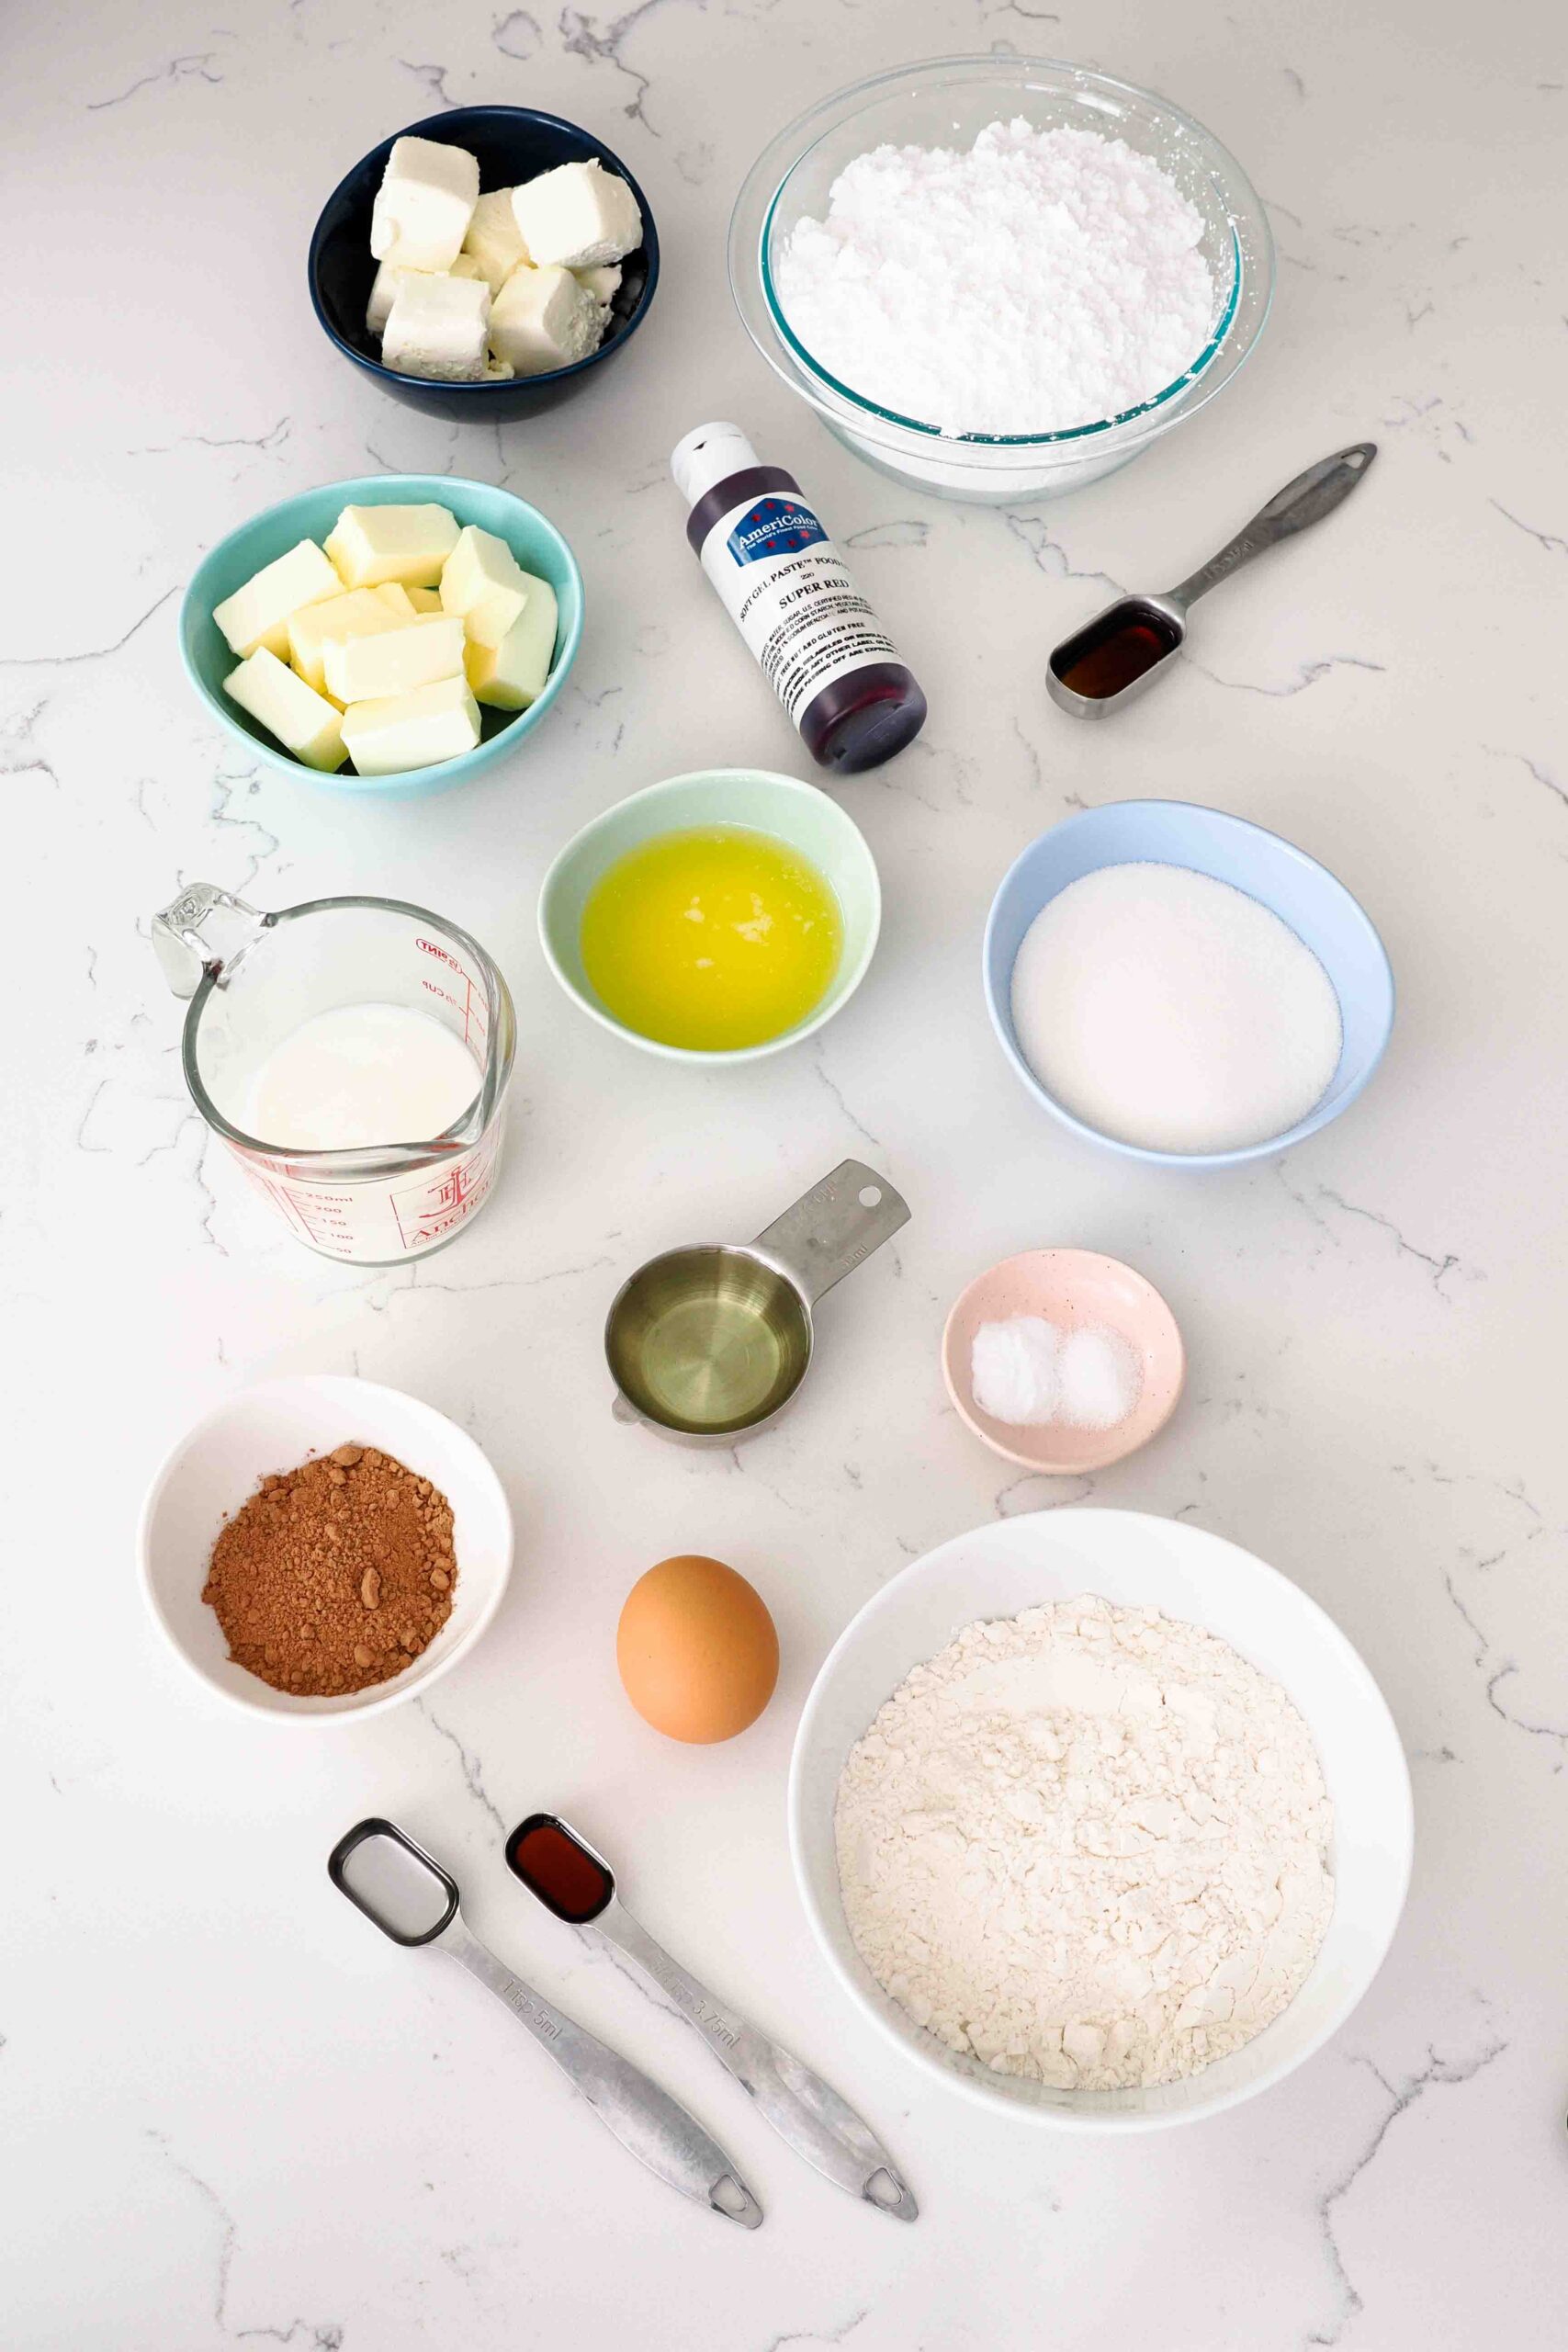 Ingredients for red velvet cupcakes and cream cheese frosting on a quartz counter.